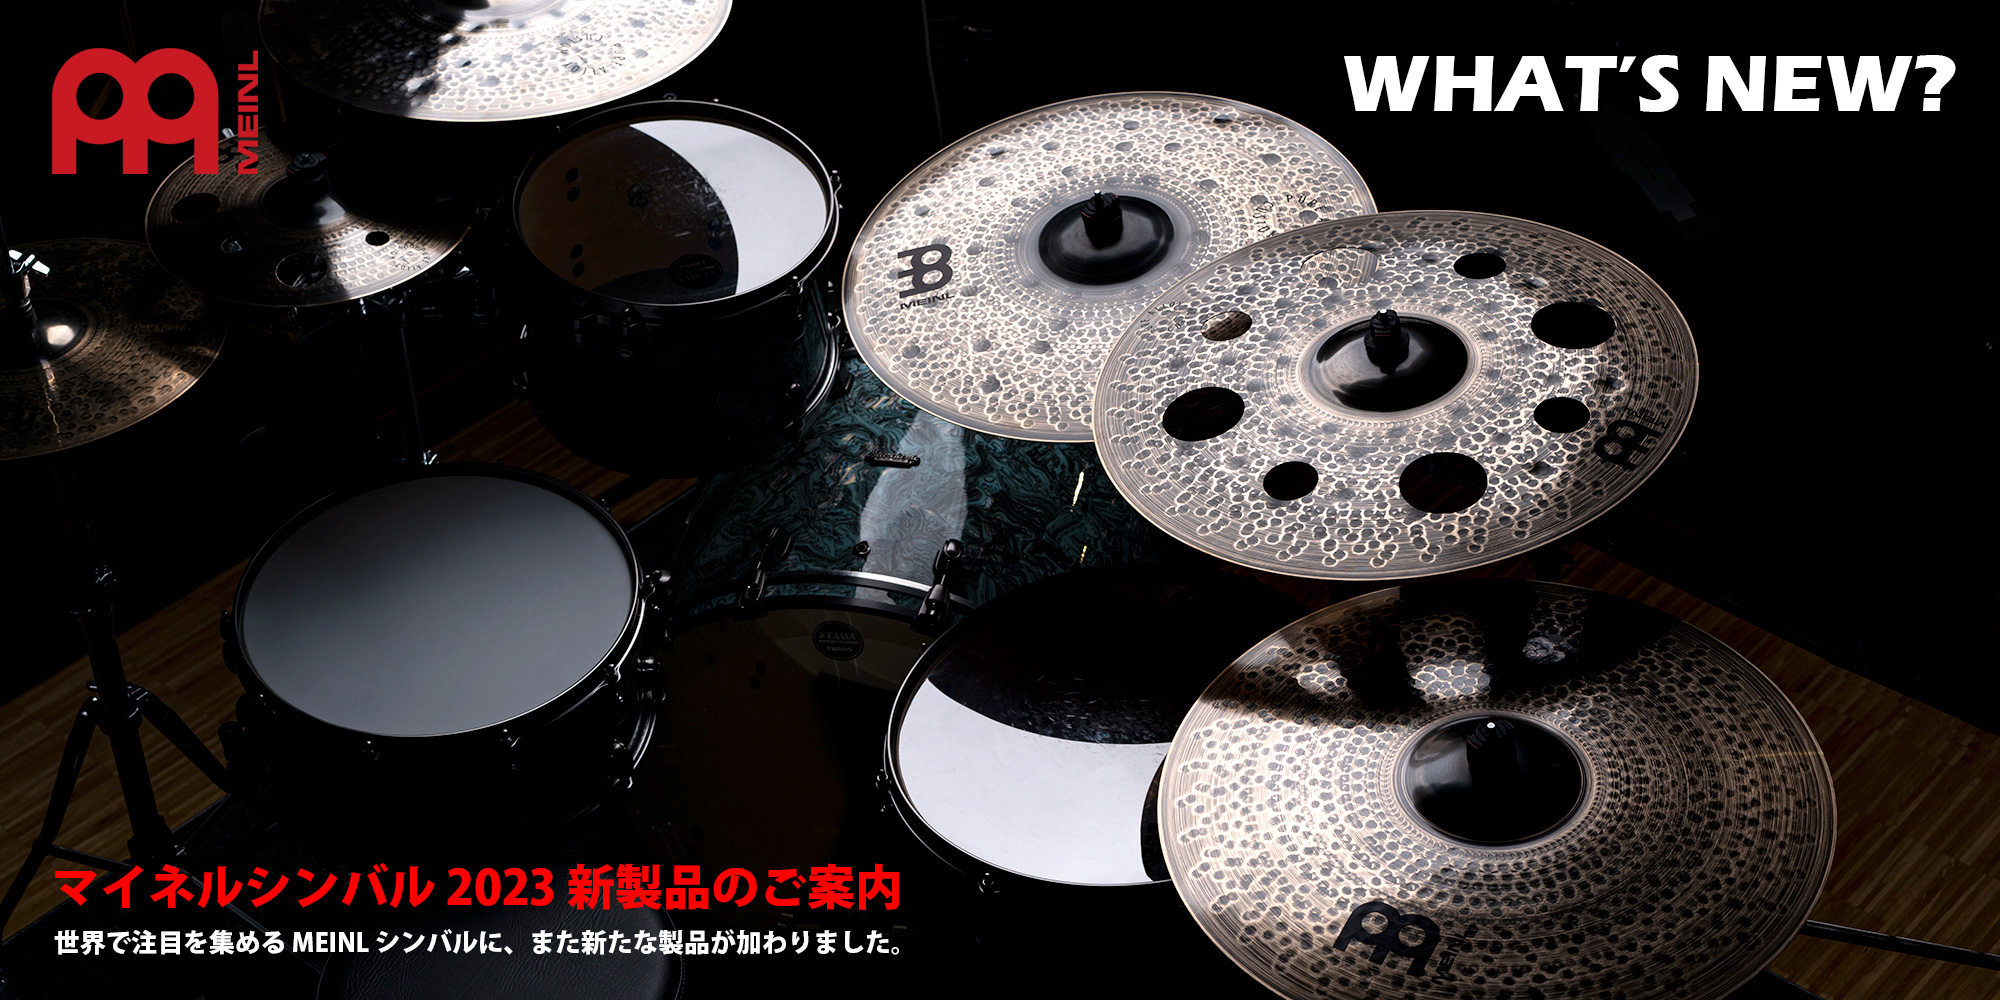 MEINL Cymbals 2023年新製品のご案内